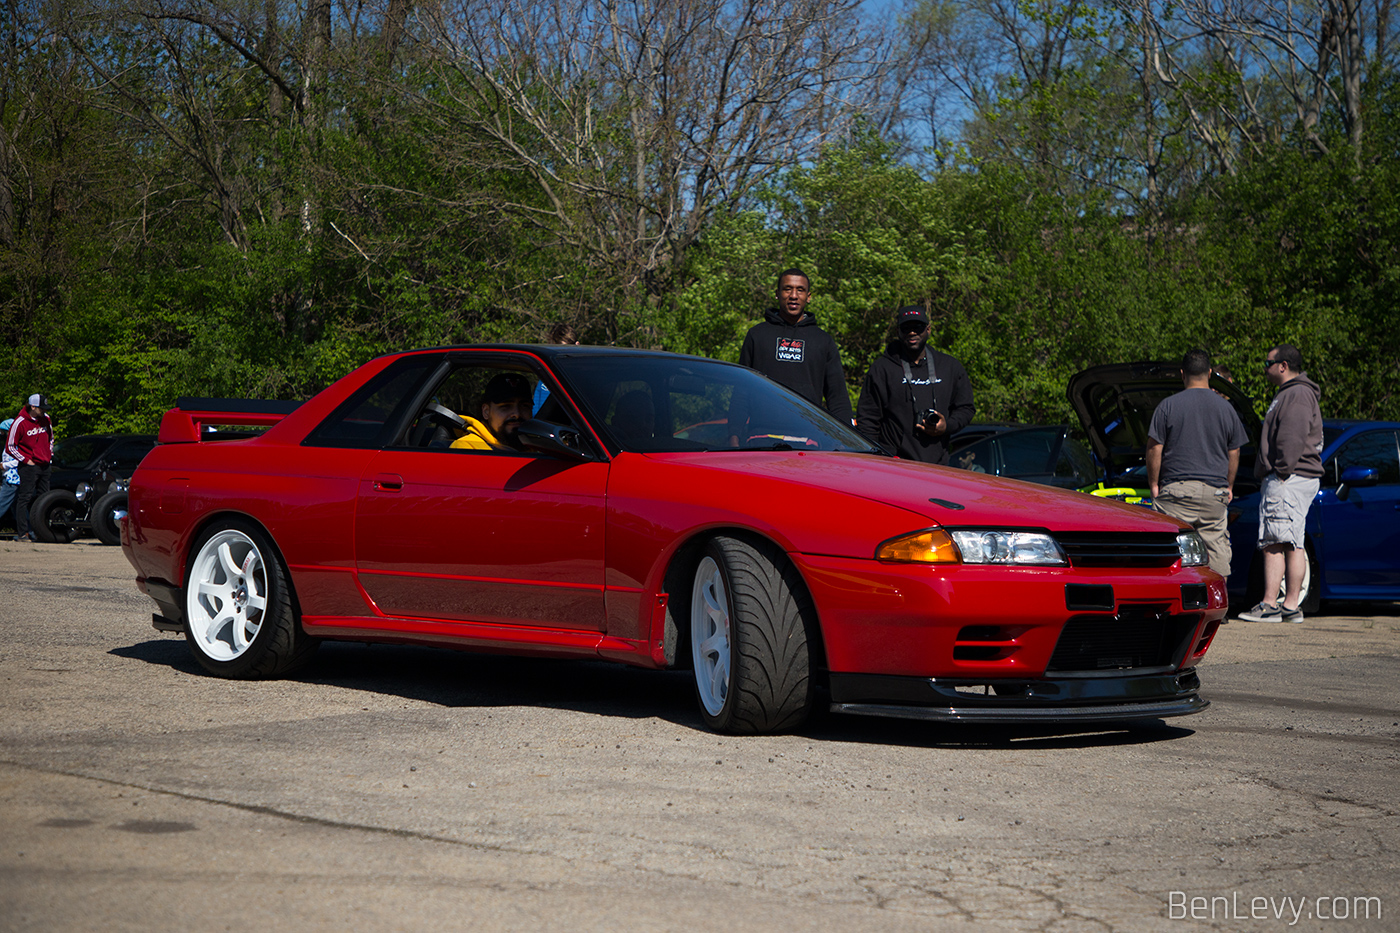 Red R32 Skyline with White Wheels